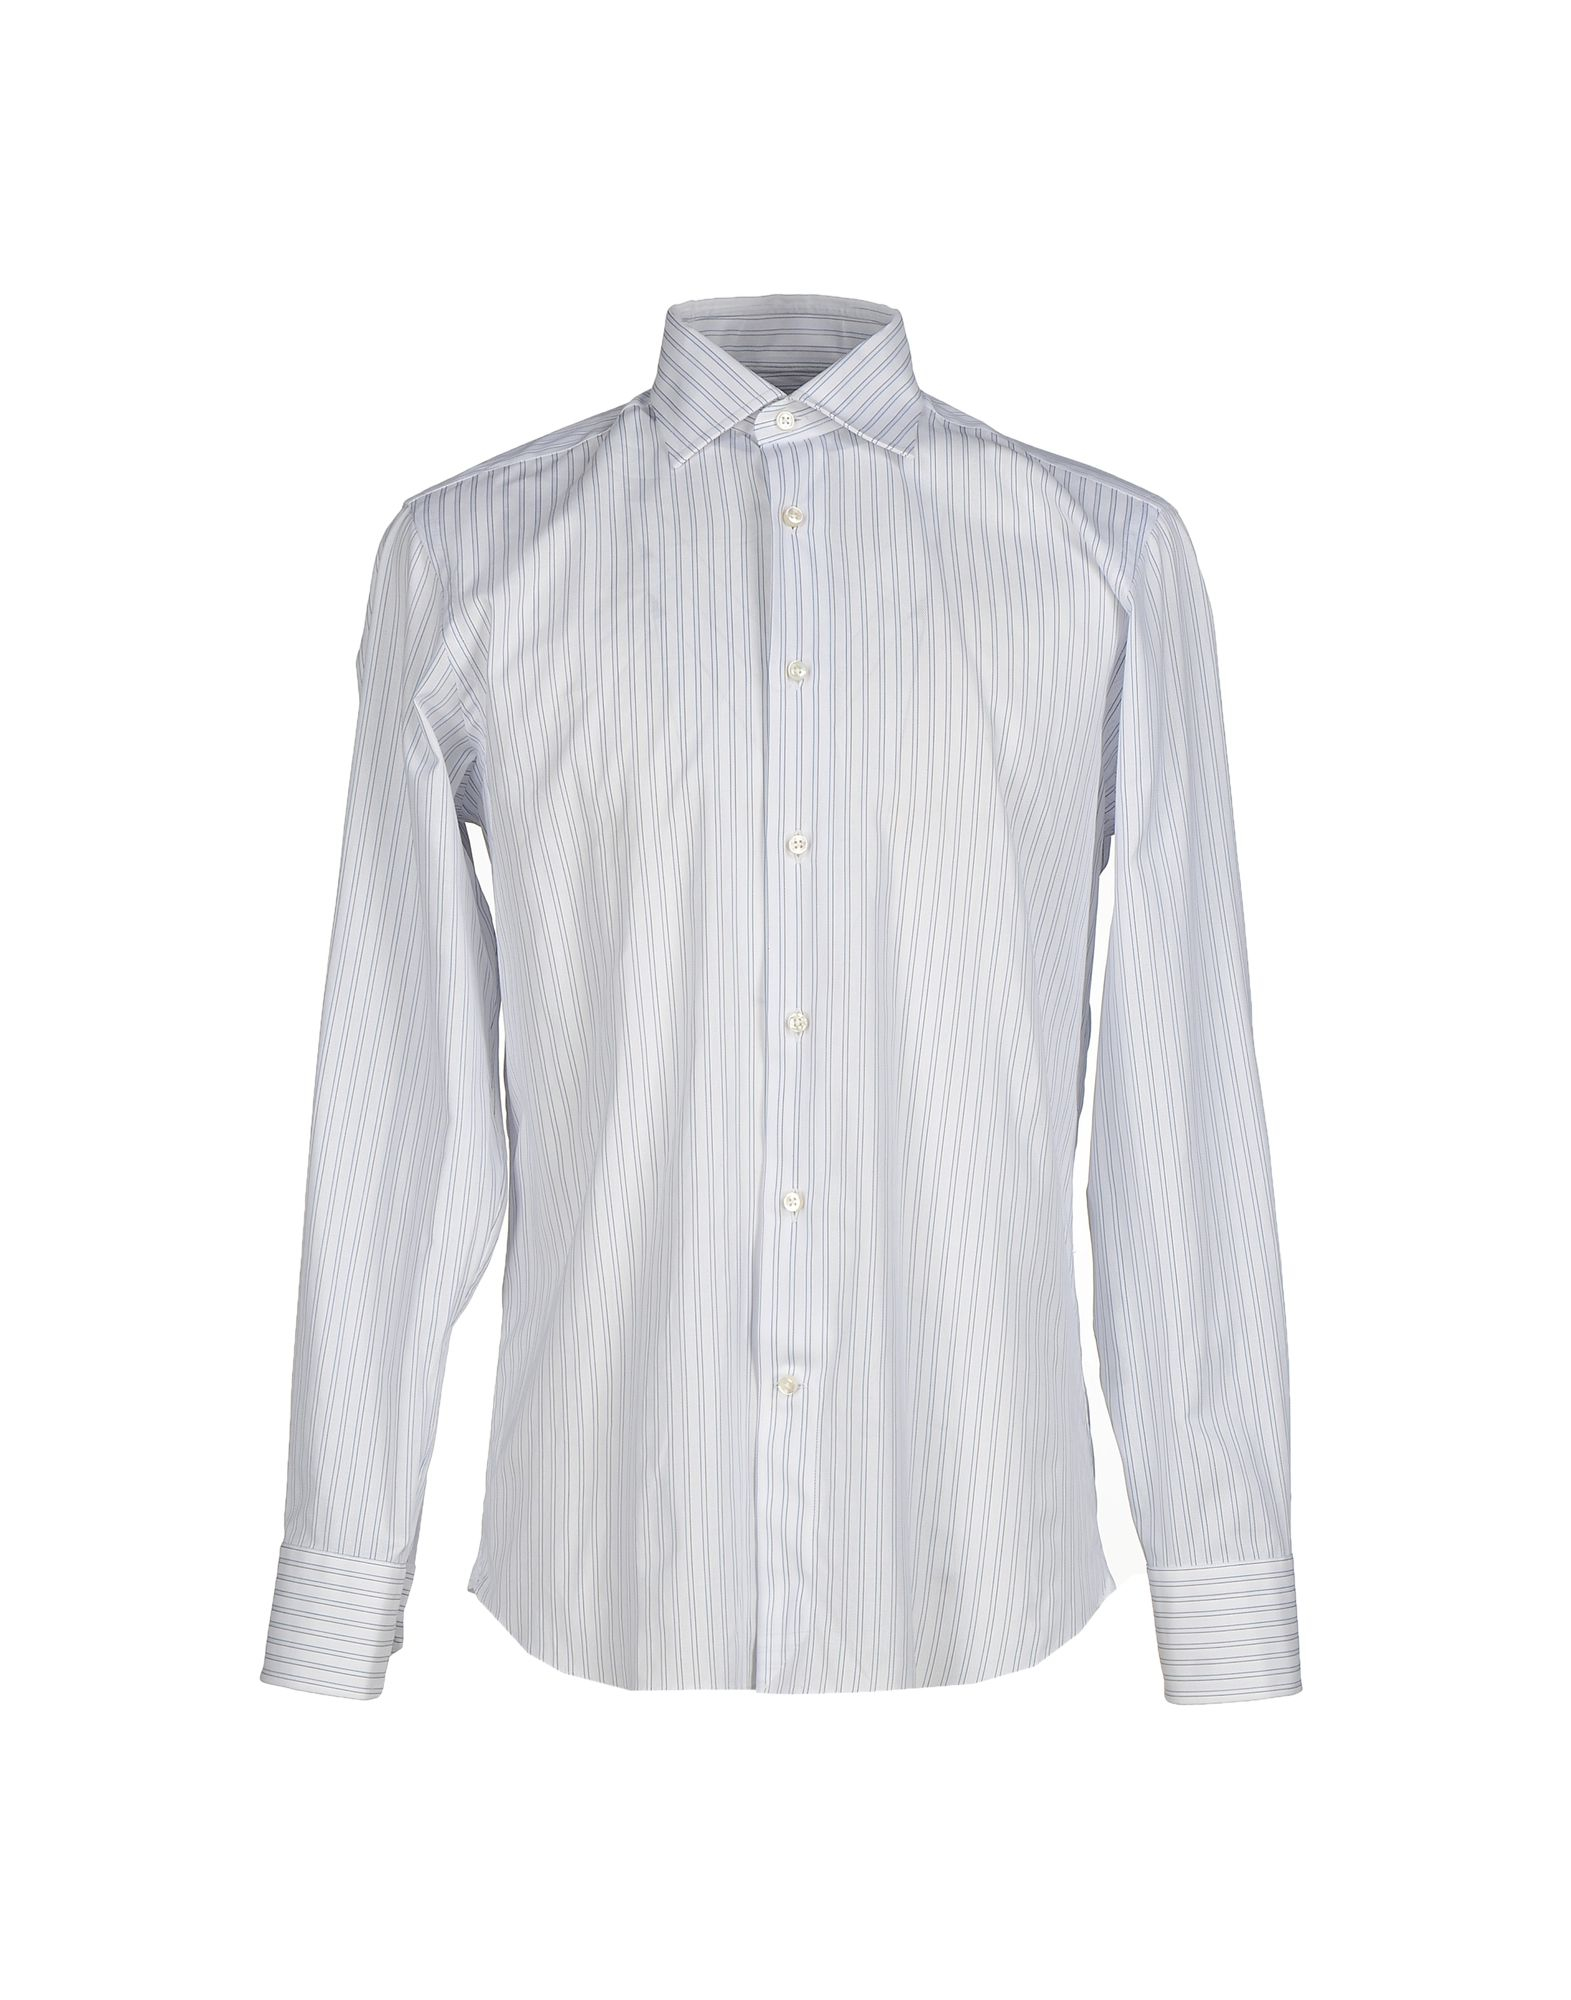 Lyst - Canali Shirt in White for Men